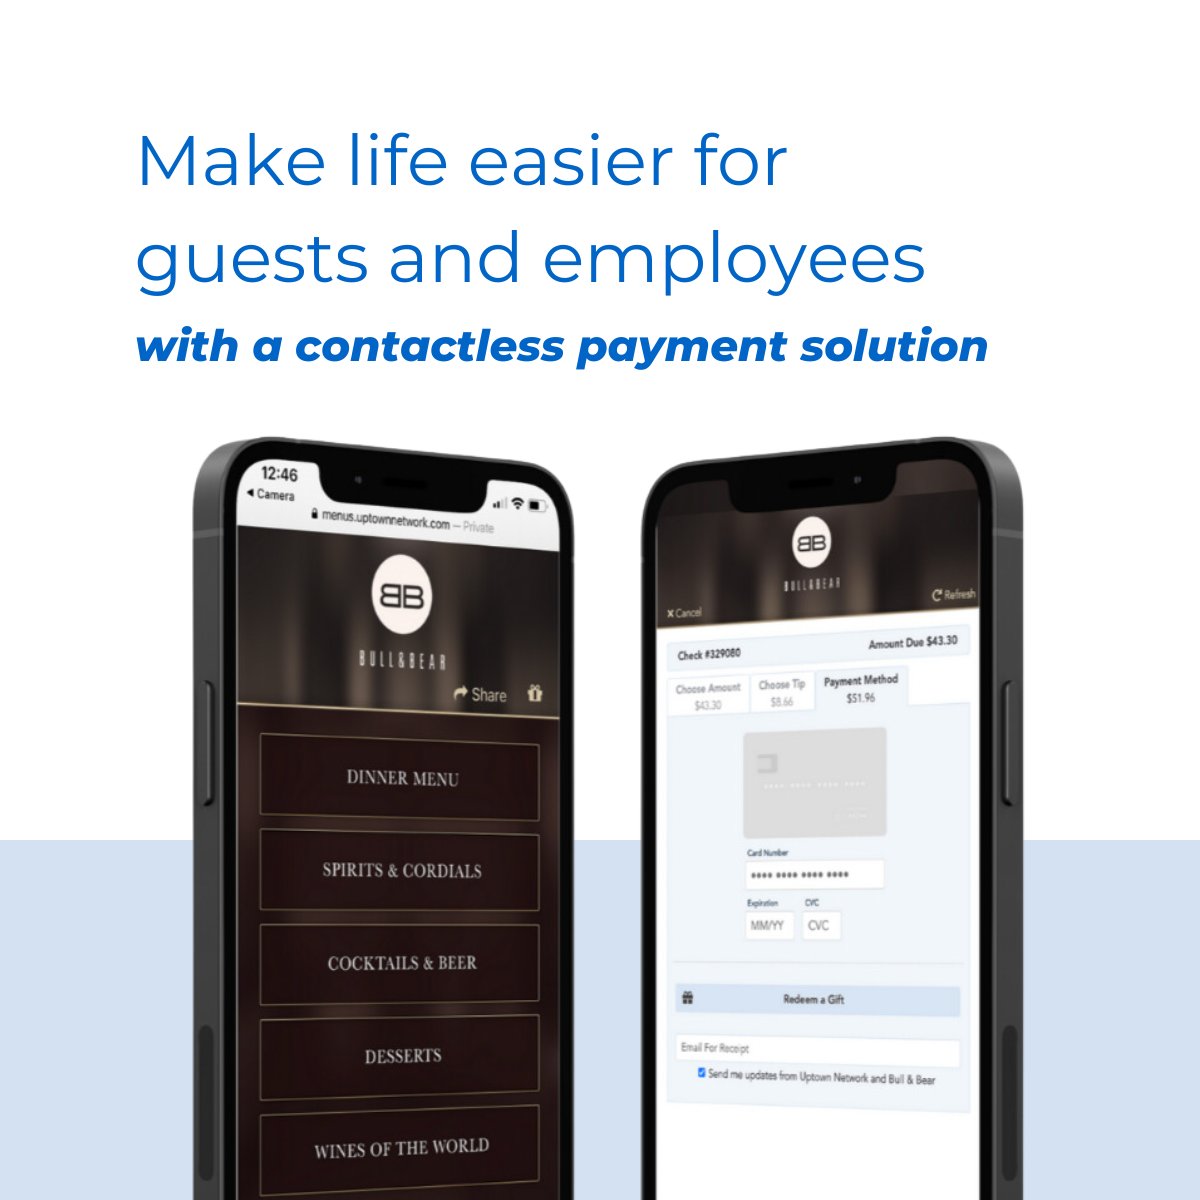 Simple contactless solutions that make a big difference for your business: vist.ly/33yp2 

#FoodAndBeverage #QRCode #HospitalityIndustry #Restaurants #Innovation #RedefineHospitality #Sustainability #Trending